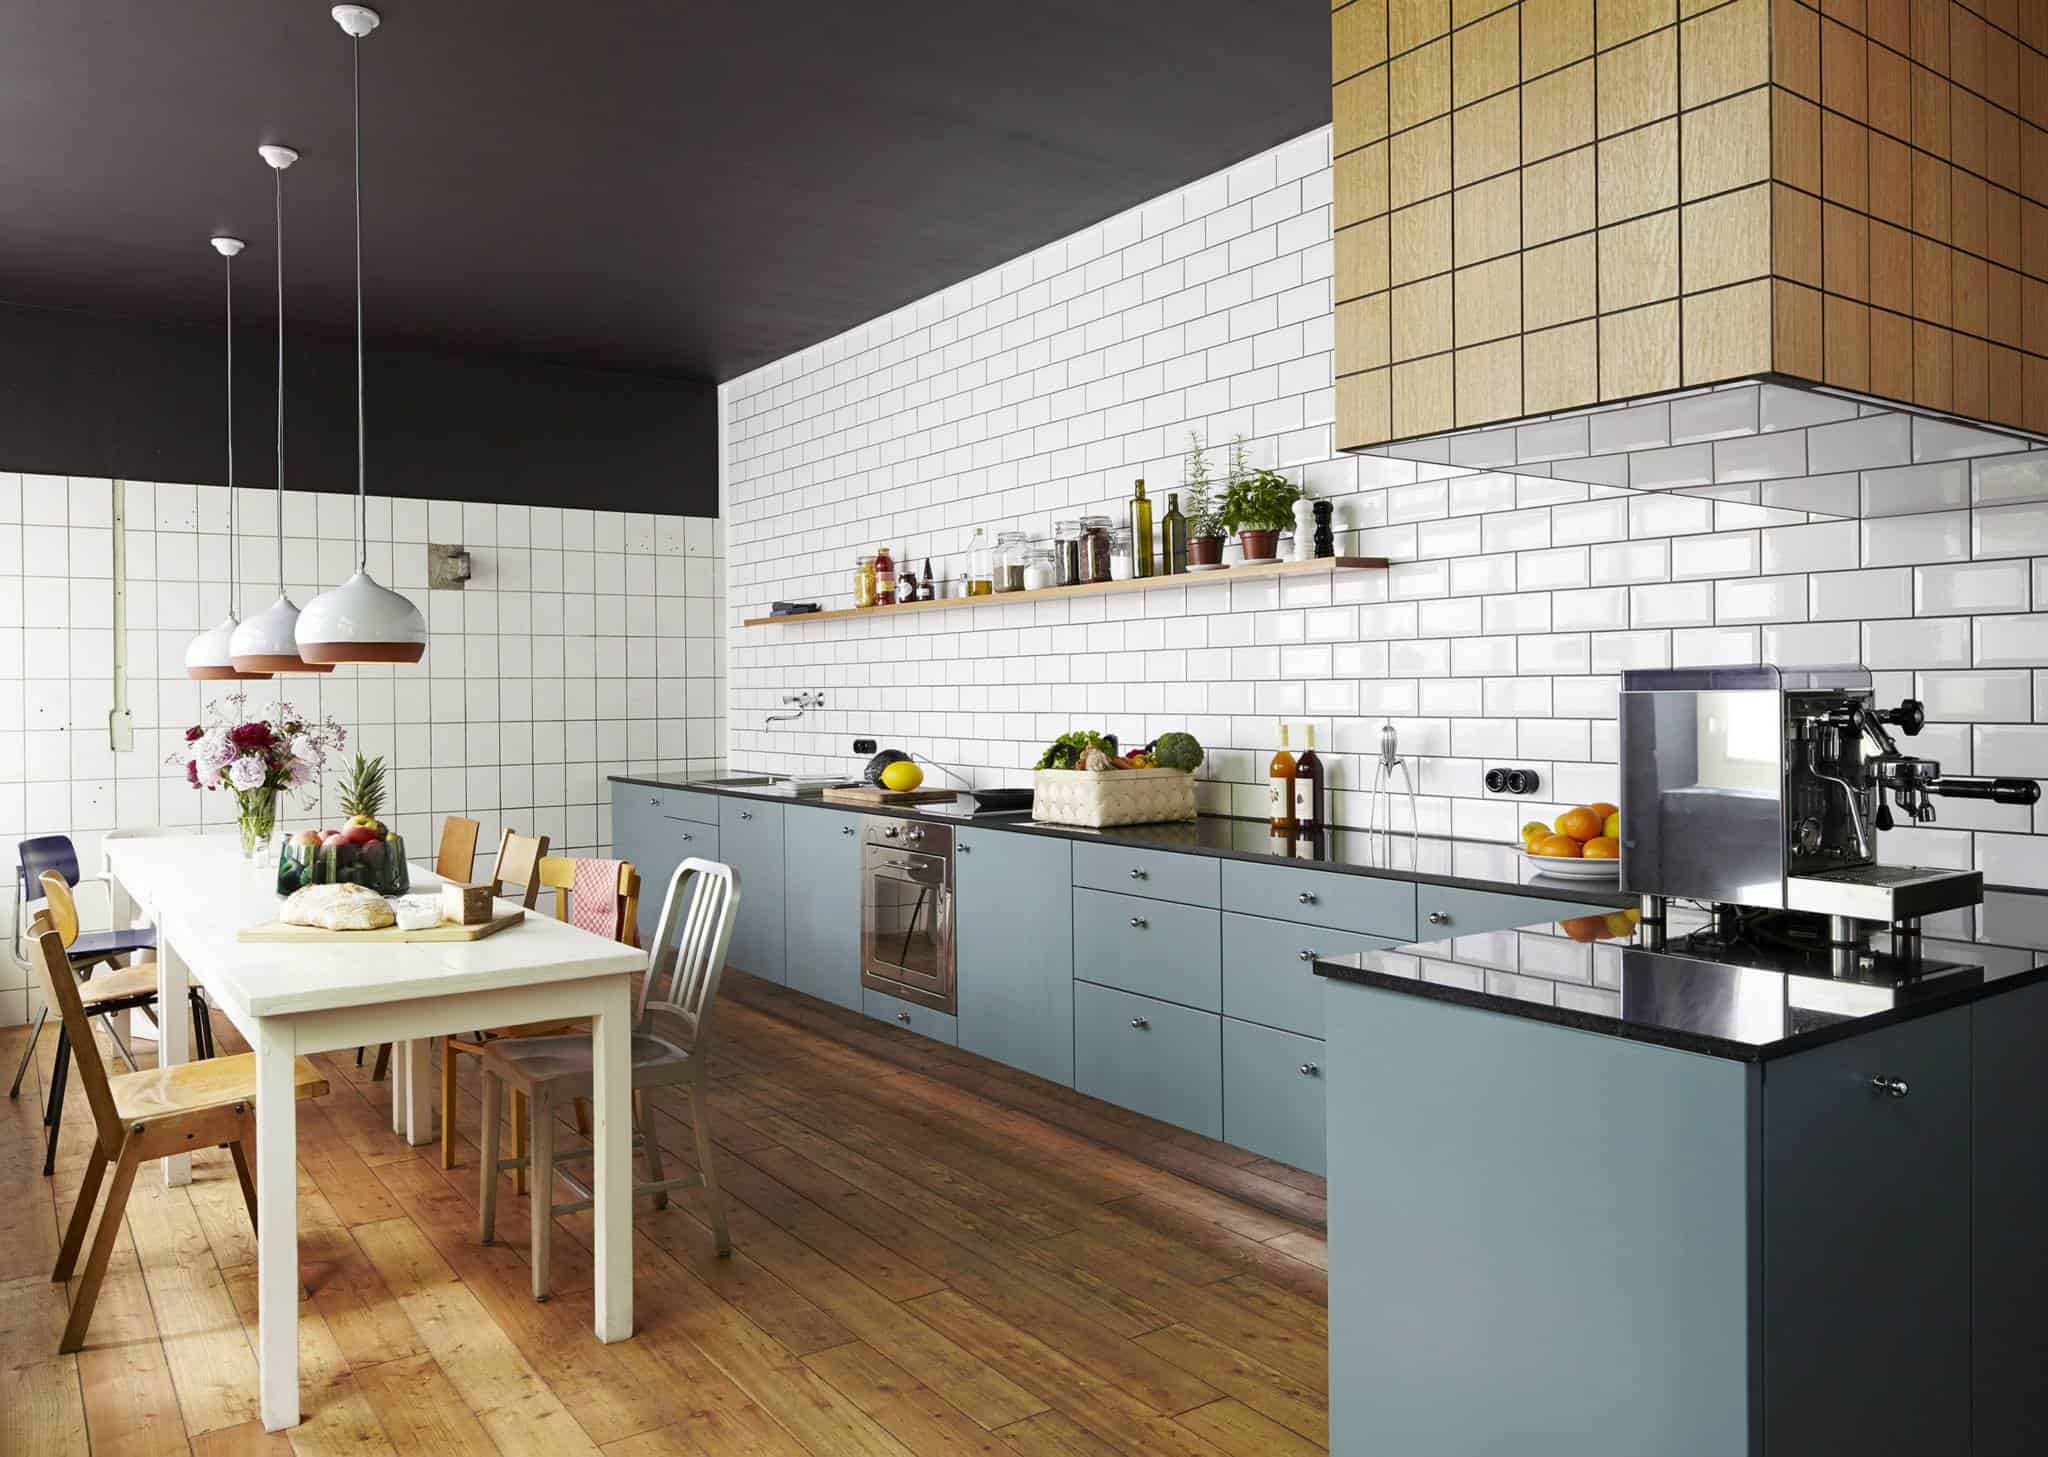 White Subway Tile Kitchen Designs are Incredibly Universal Urban vs. Country